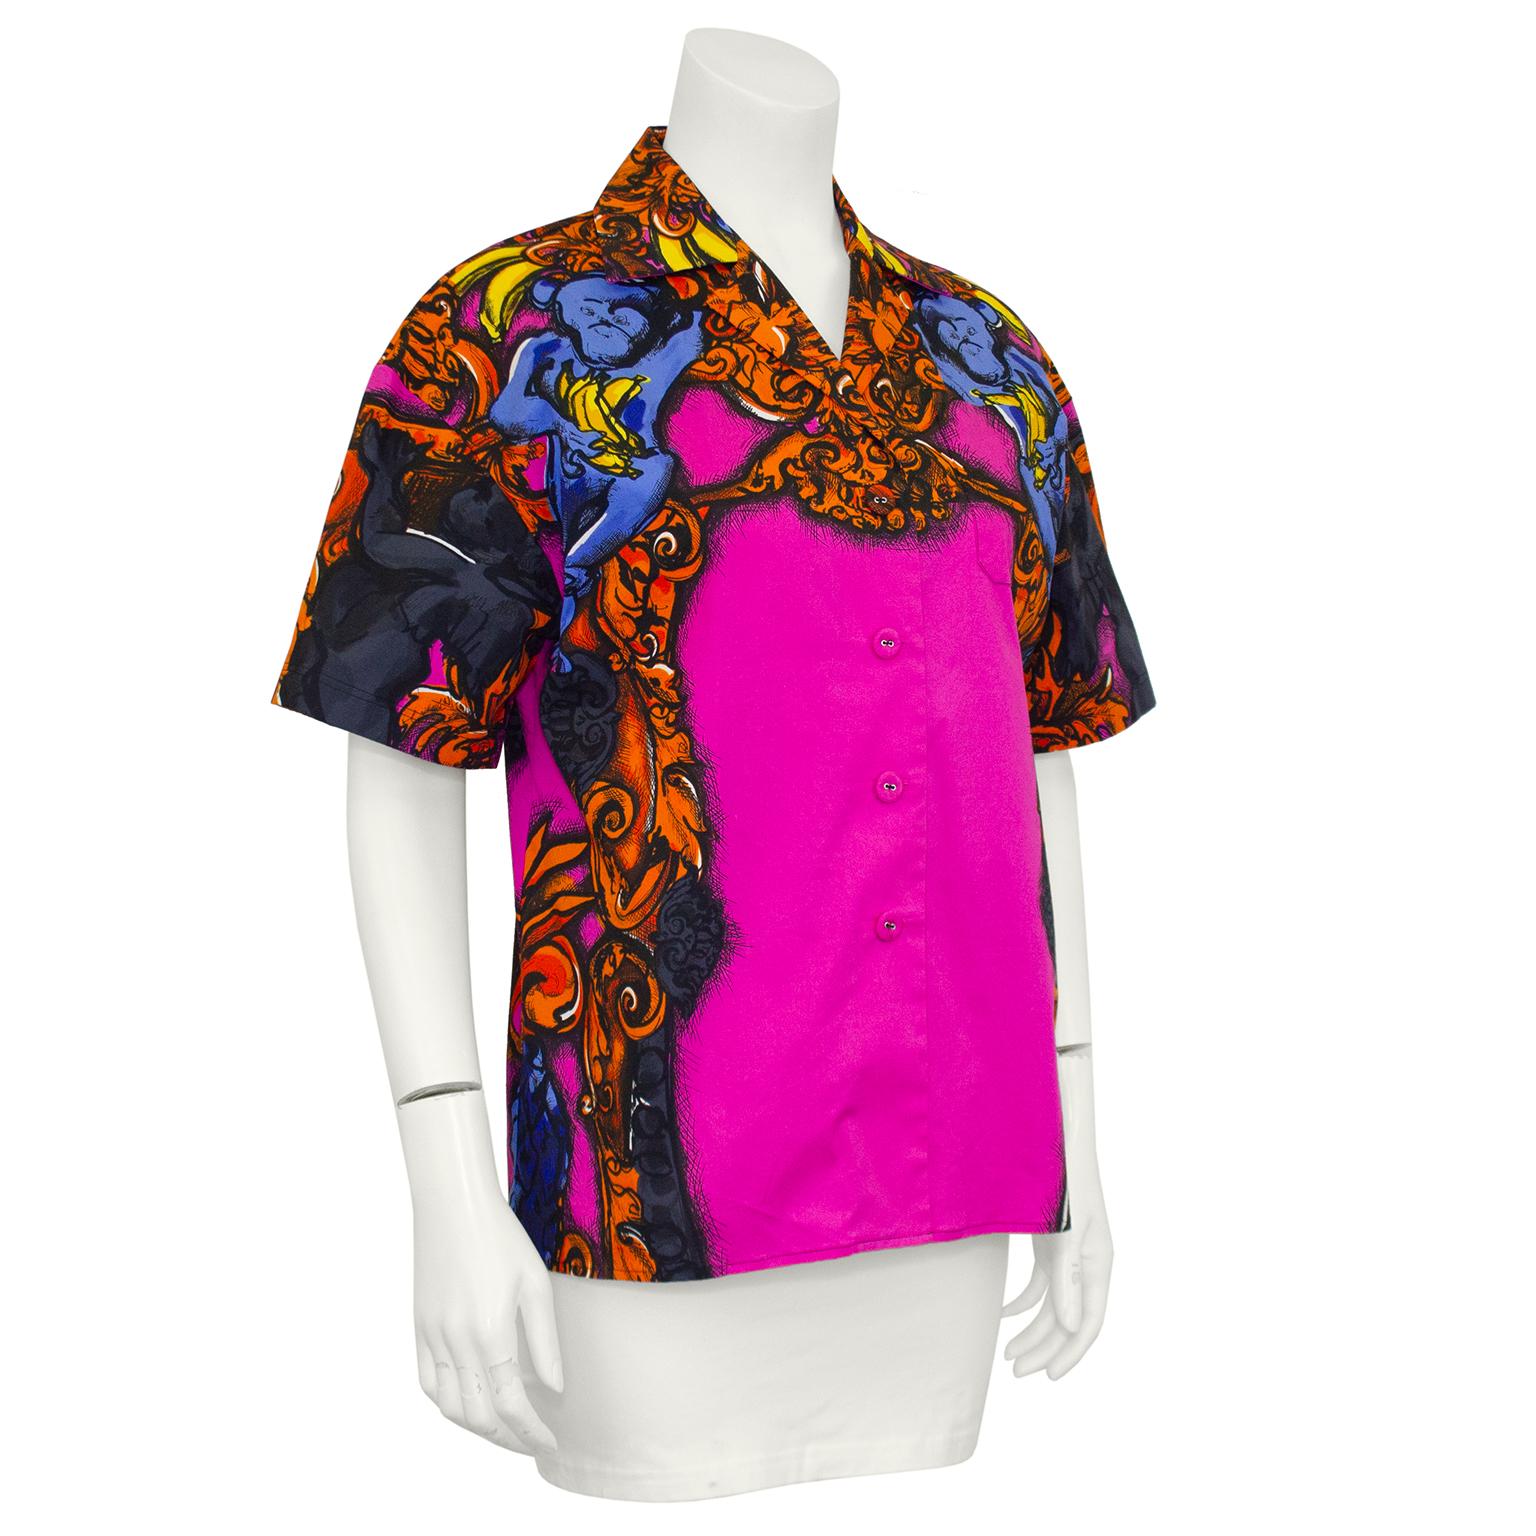 PRADA cotton shirt from spring/summer 2011 featuring the iconic 